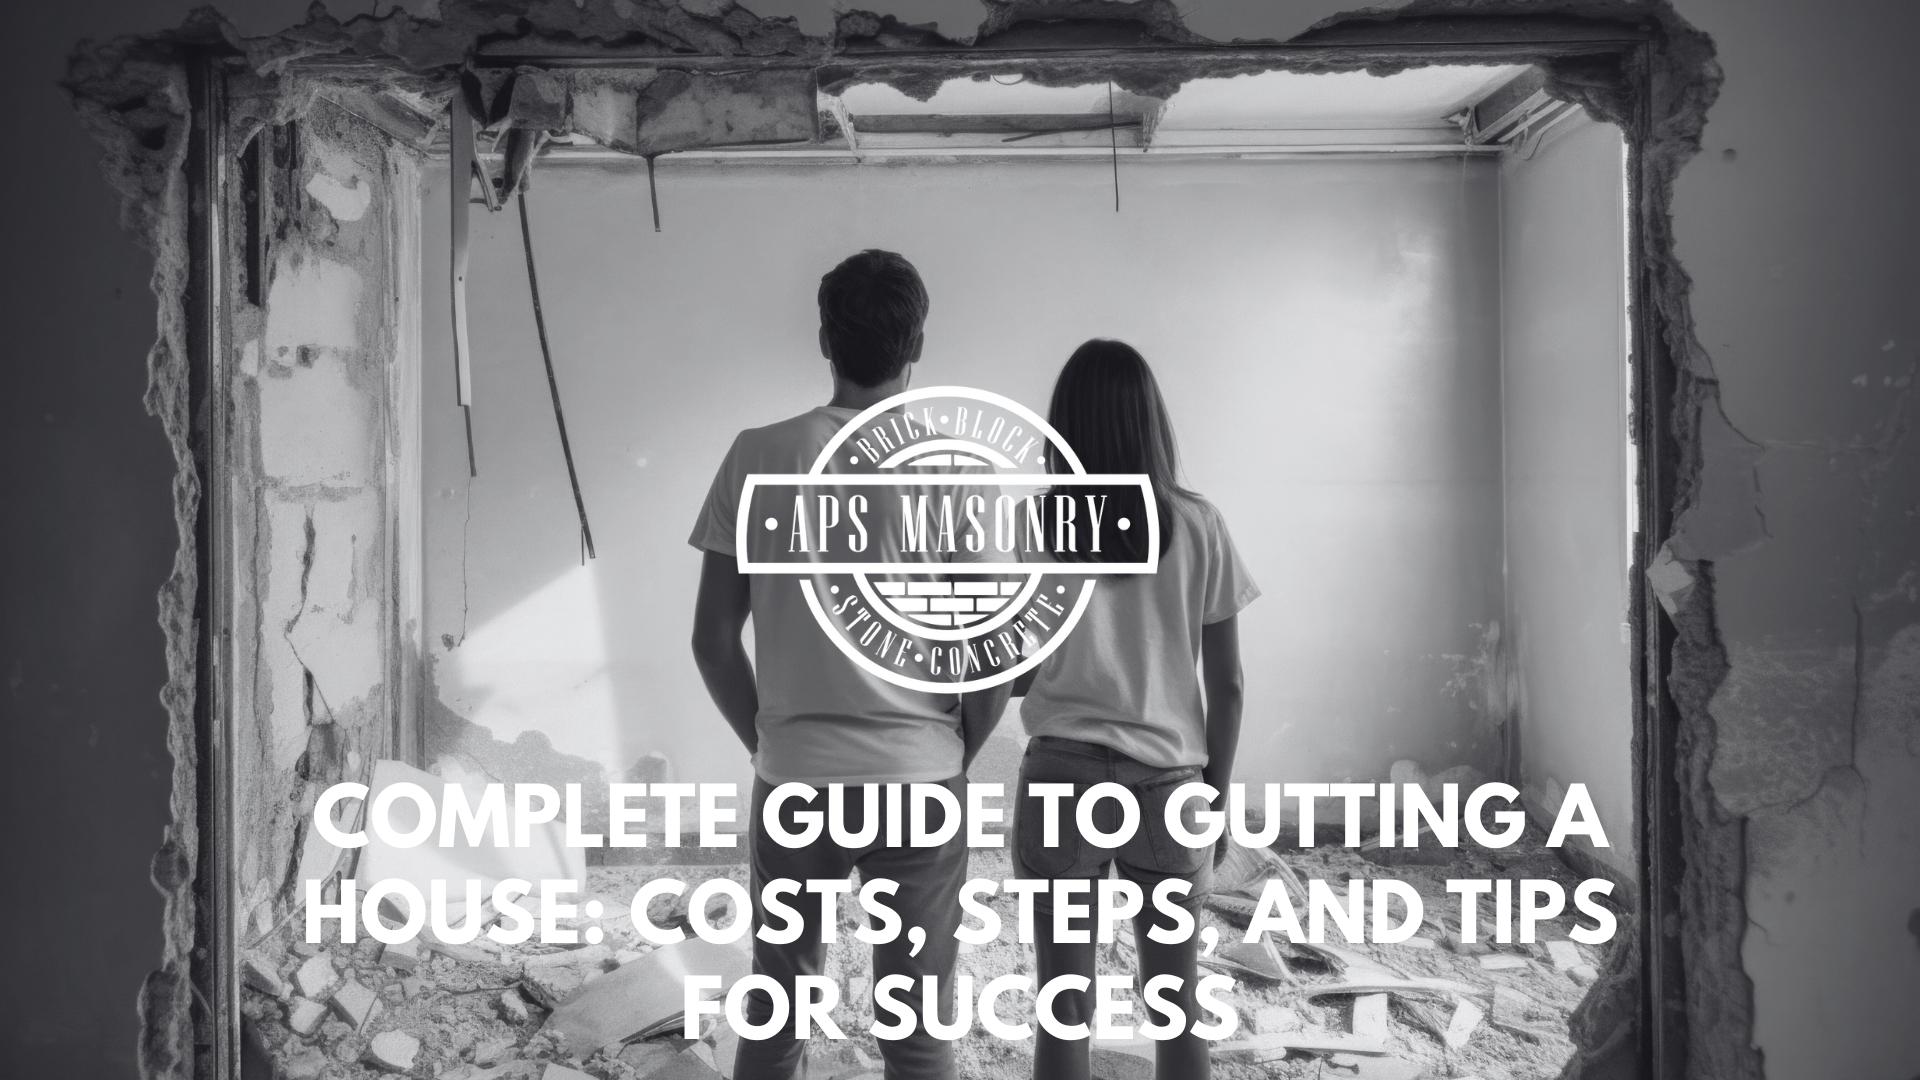 Complete Guide to Gutting a House: Costs, Steps, and Tips for Success